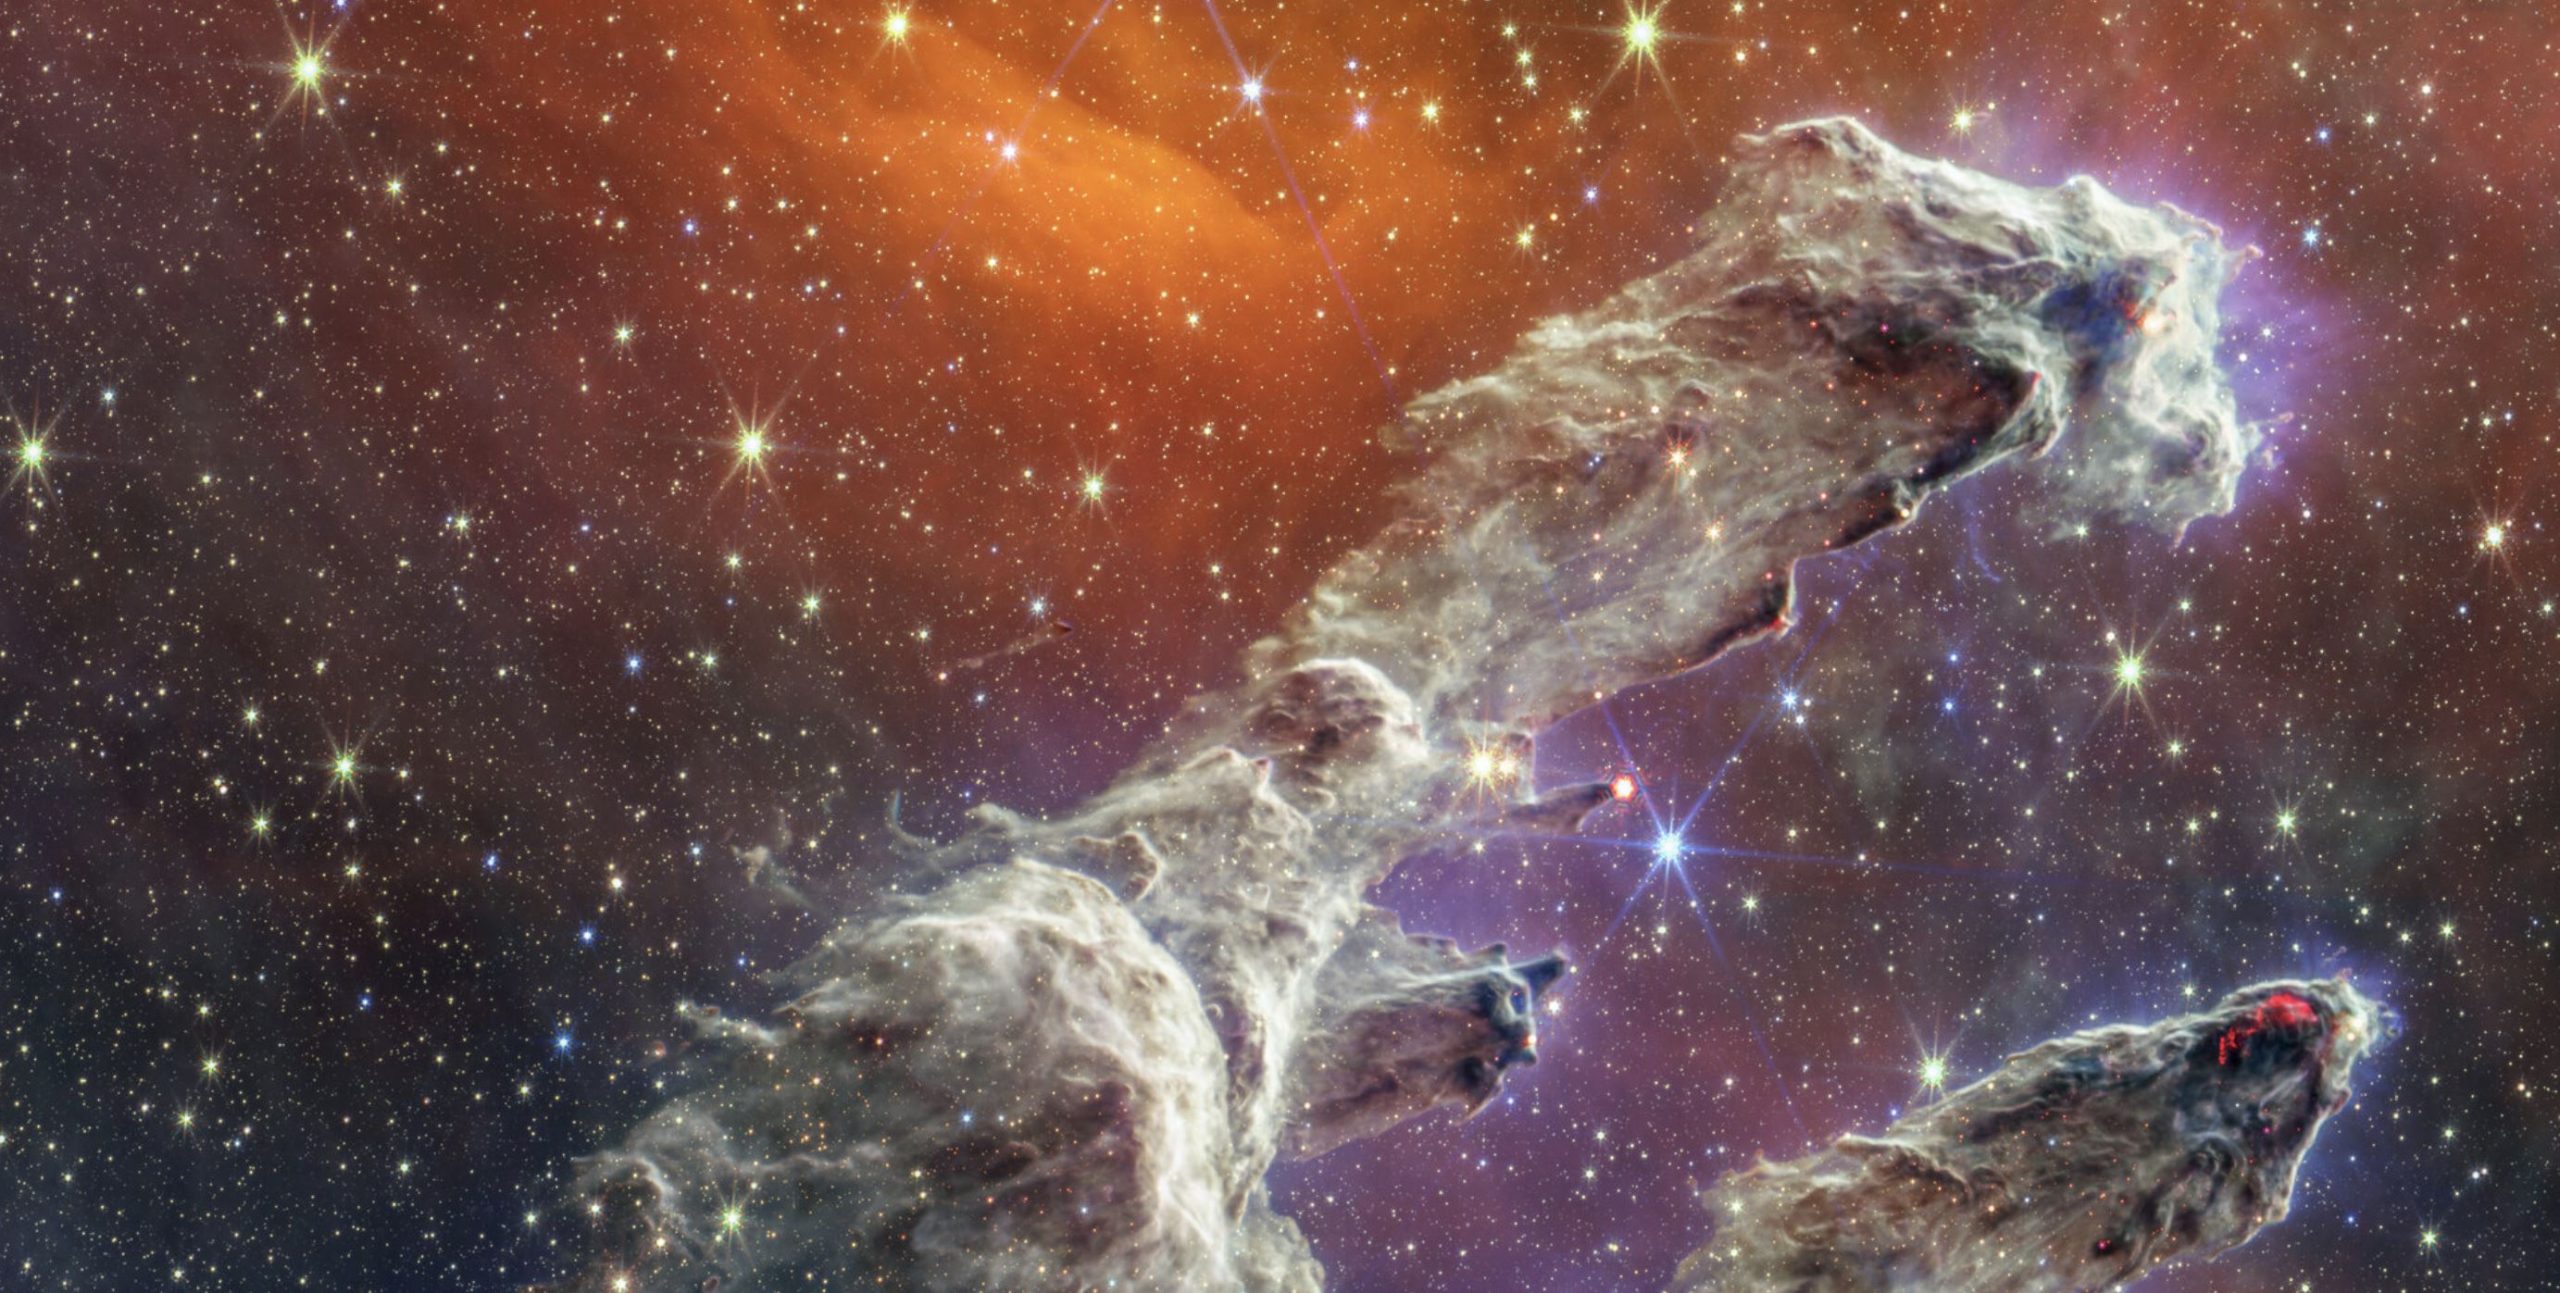 A cropped view of the Pillars of Creation as seen by Webb. Image Credit: NASA, ESA, CSA, STScI, J. DePasquale (STScI), A. Pagan (STScI), A. M. Koekemoer (STScI); CC BY 4.0.